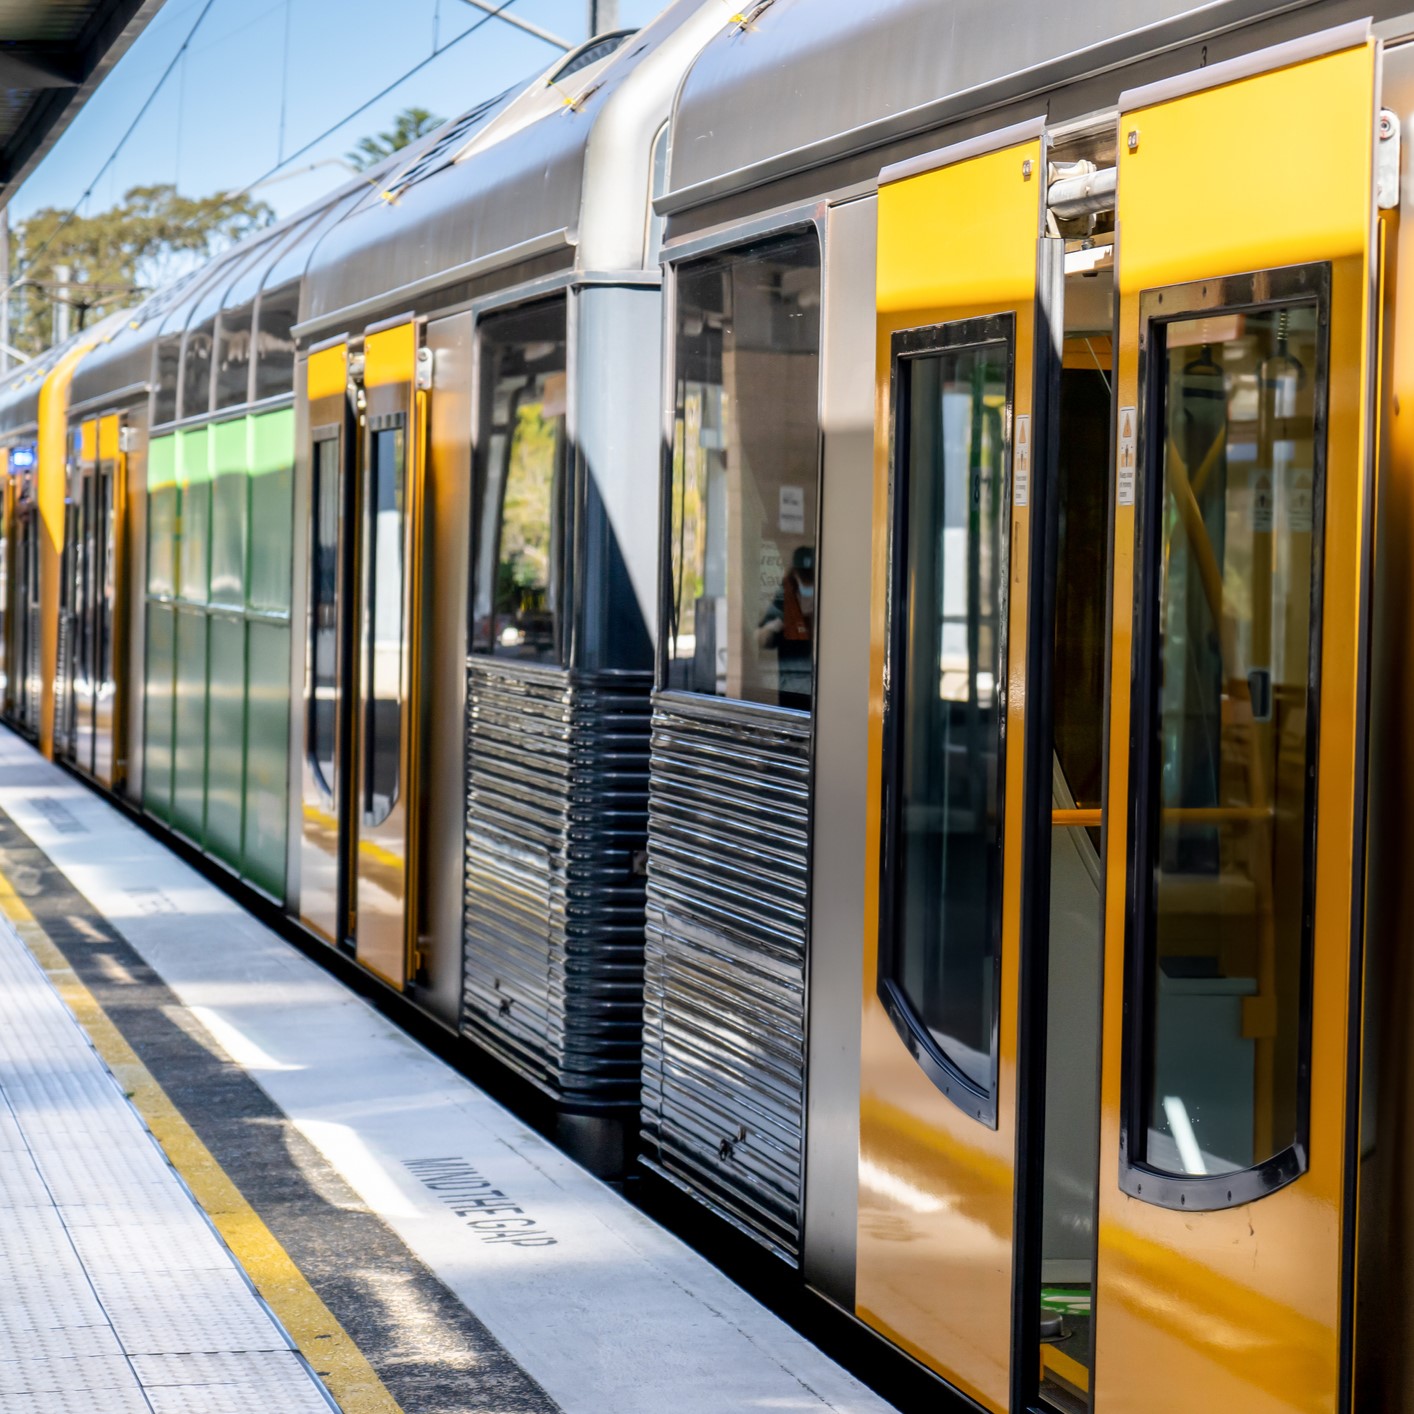 Heavy Duty Interconnect Solutions for Rail on Display at Expo Ferroviaria